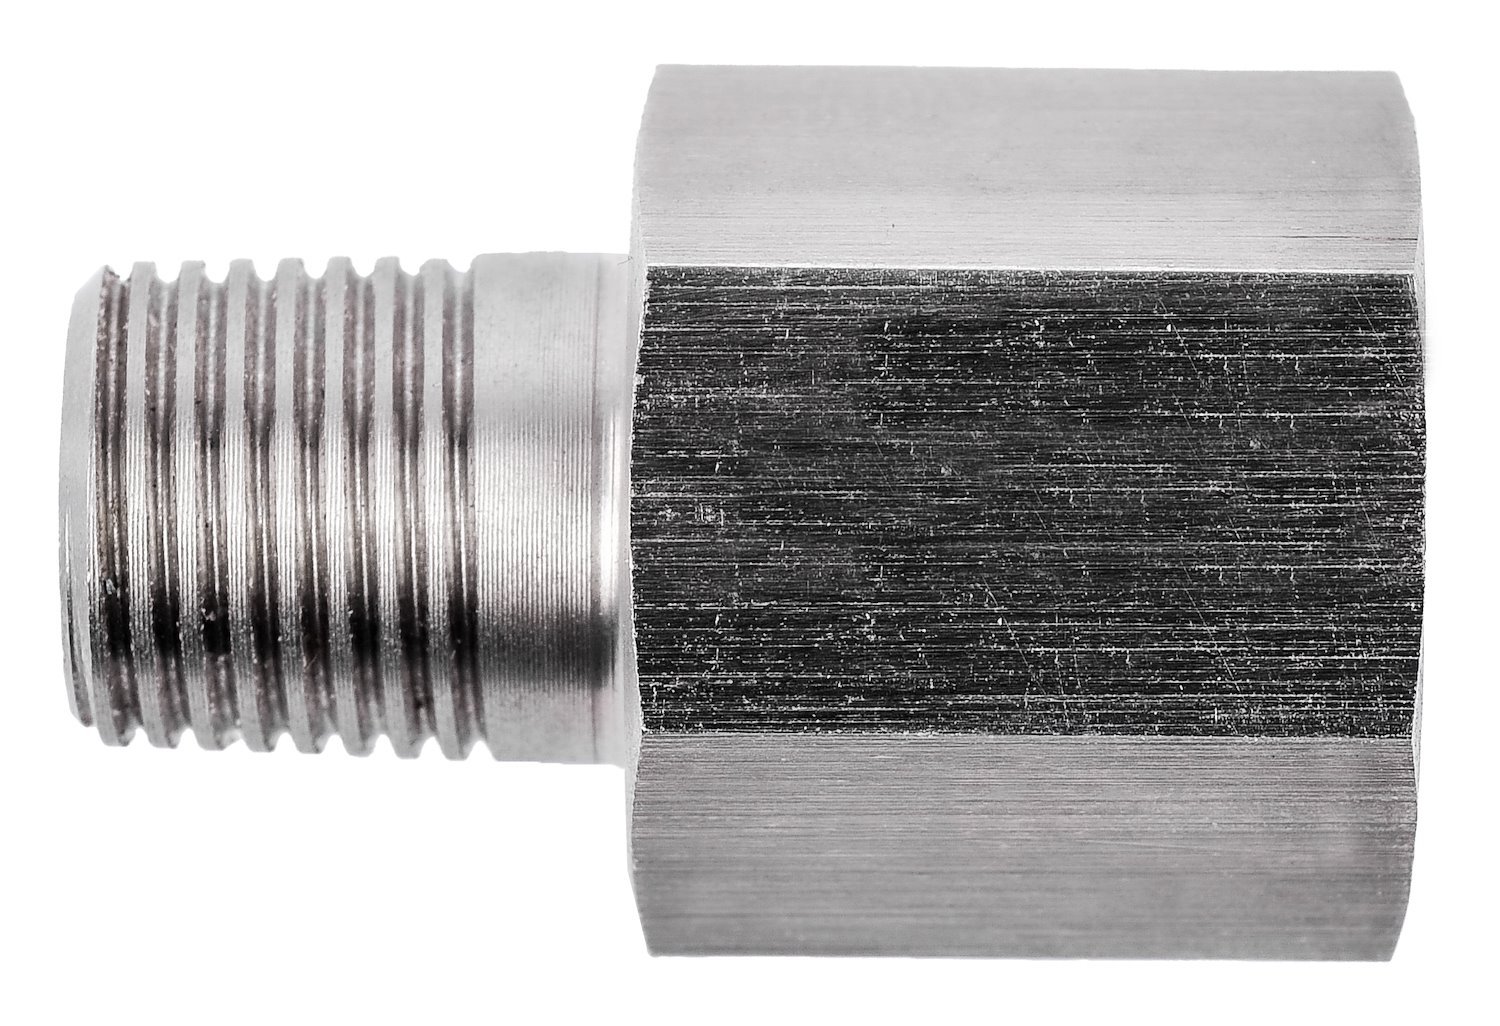 Metric BSPT to NPT Straight Adapter Fitting [1/8 Metric BSPT Male to 1/8 in. NPT Female, Stainless Steel]